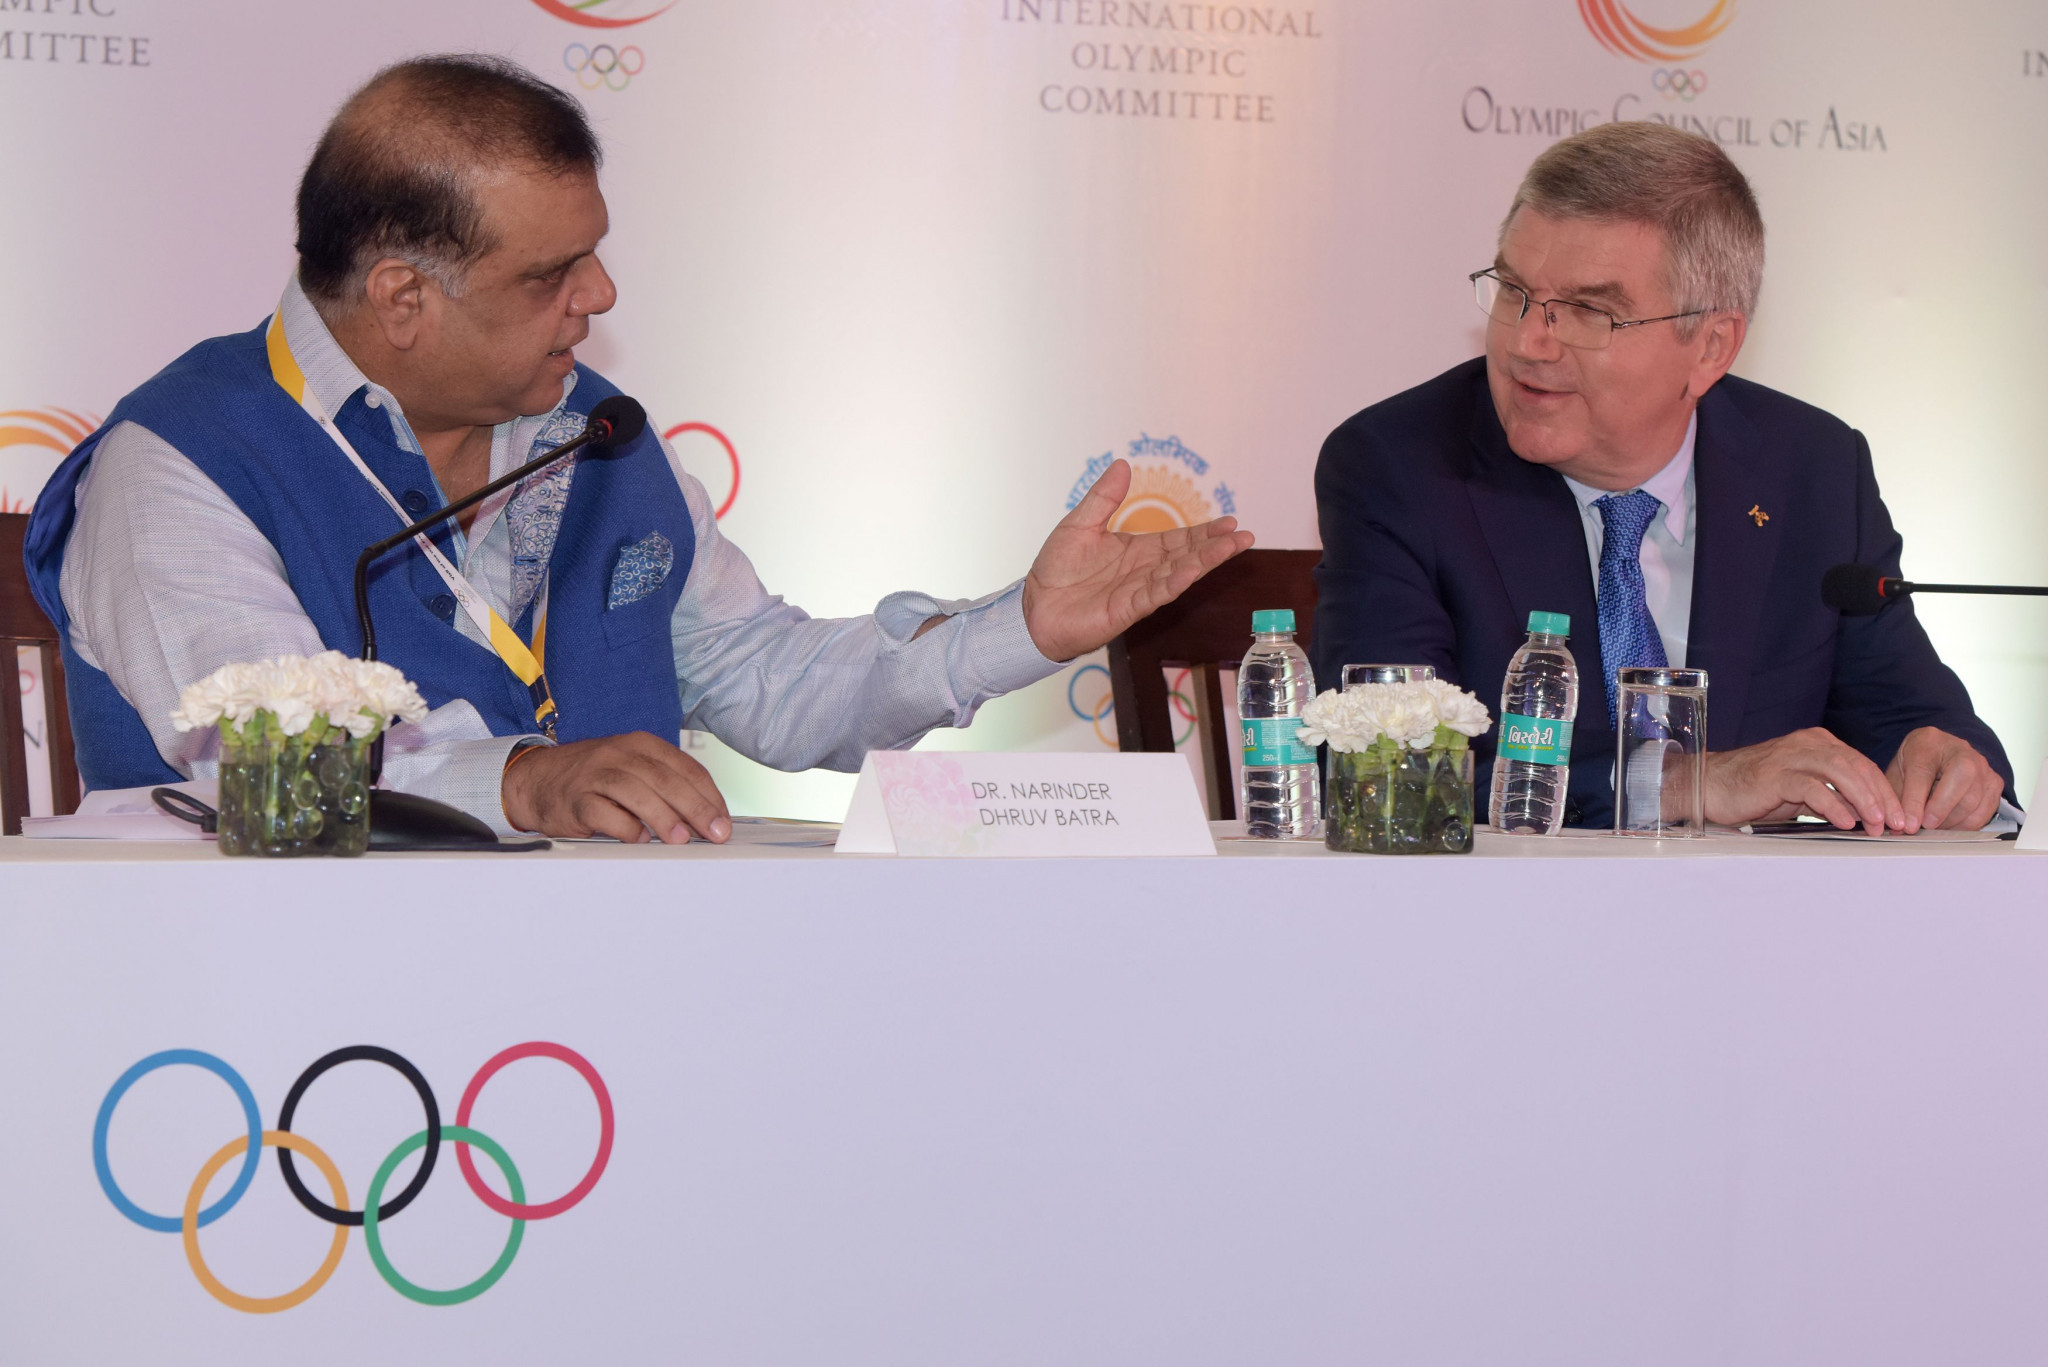 IOA President Narinder Batra participated in a joint press conference with IOC counterpart Thomas Bach during the German's visit to India in April ©Getty Images